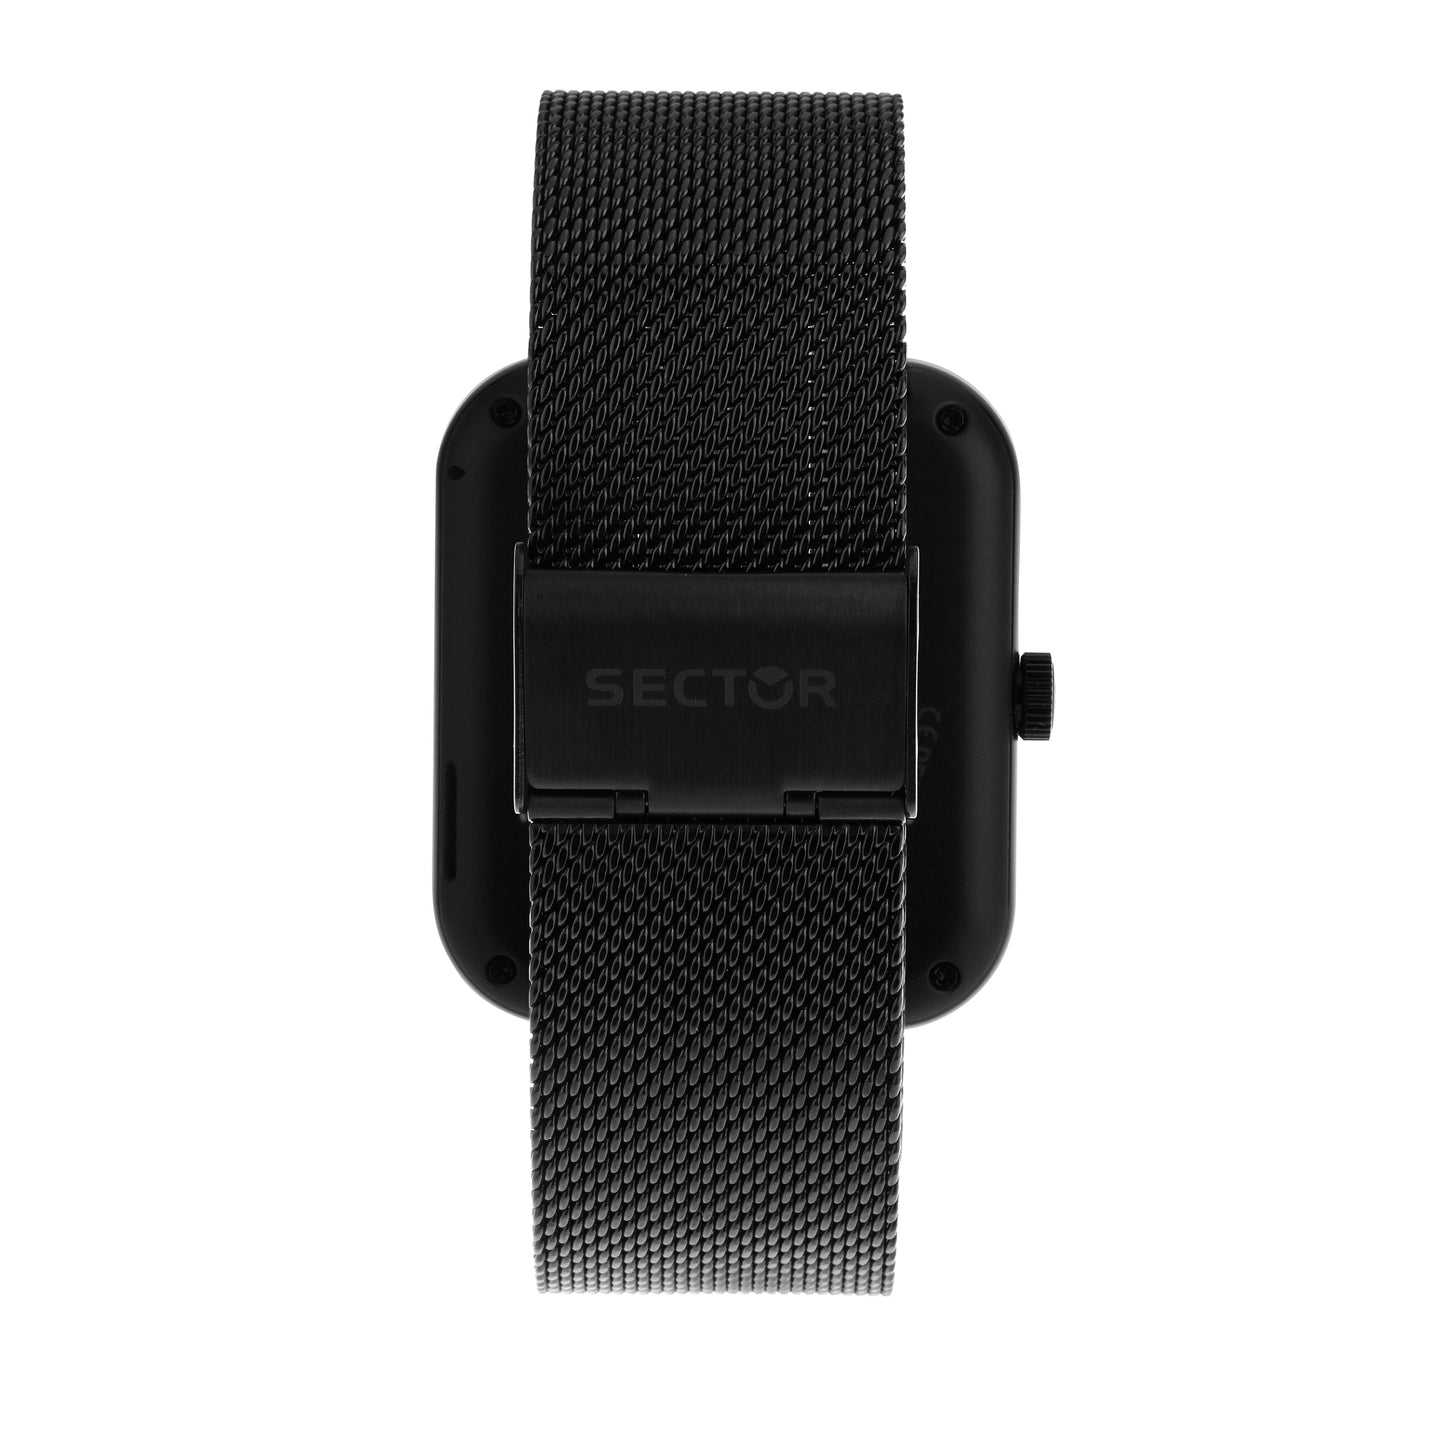 SMARTWATCH HOMME SECTOR S-03 WR 3ATM R3253294002